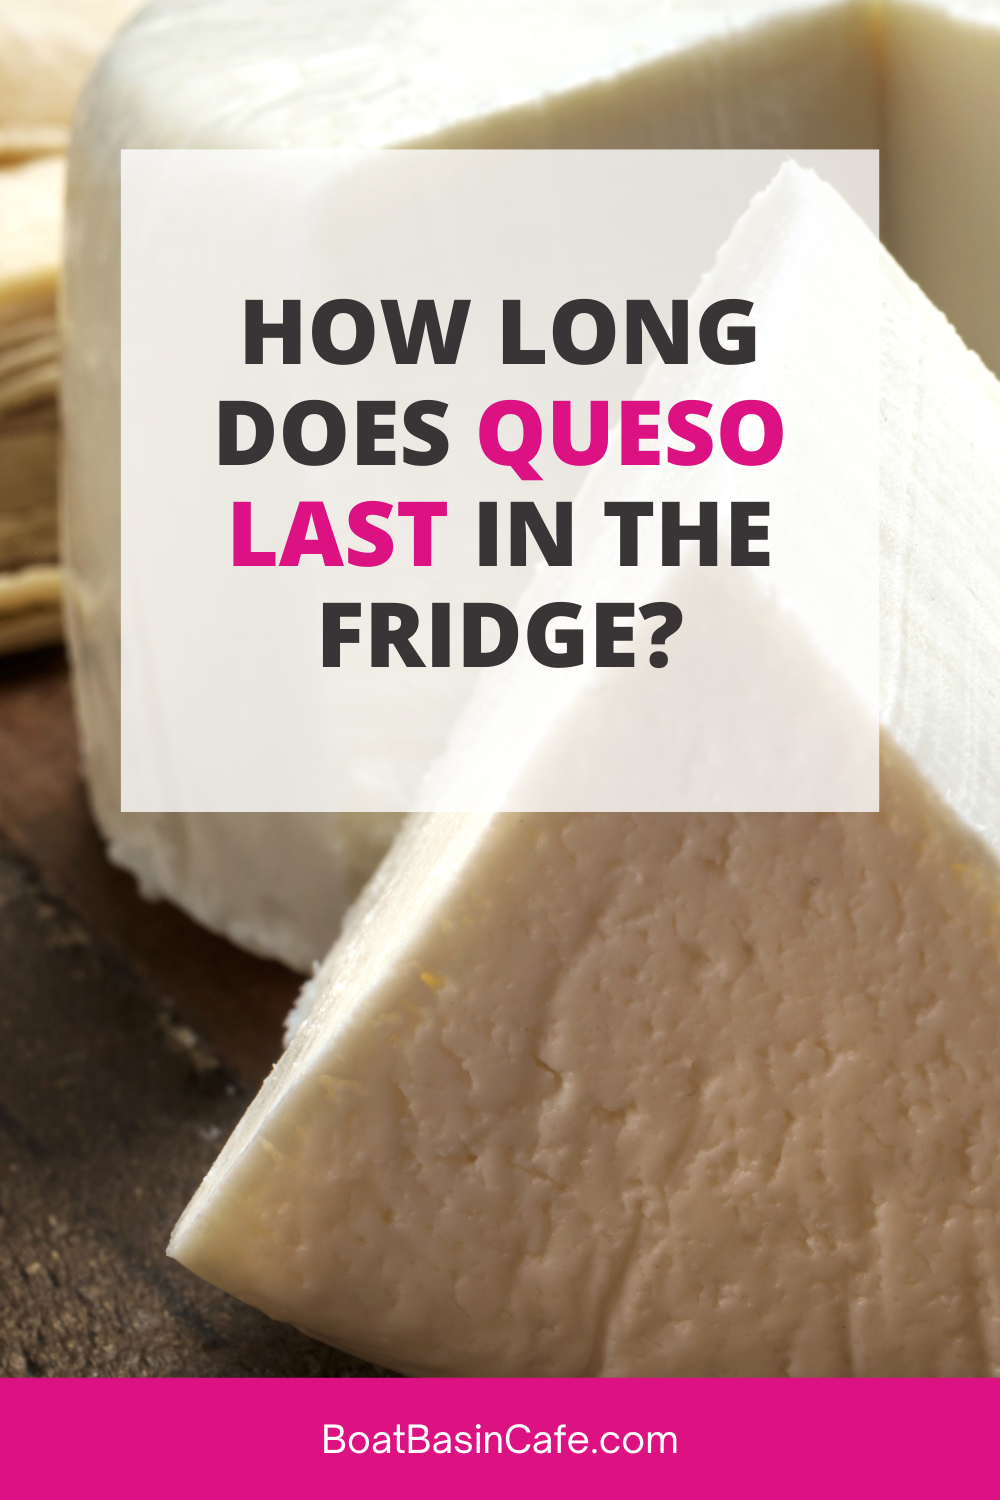 How long does queso last in the fridge? + Tips to make it last longer!